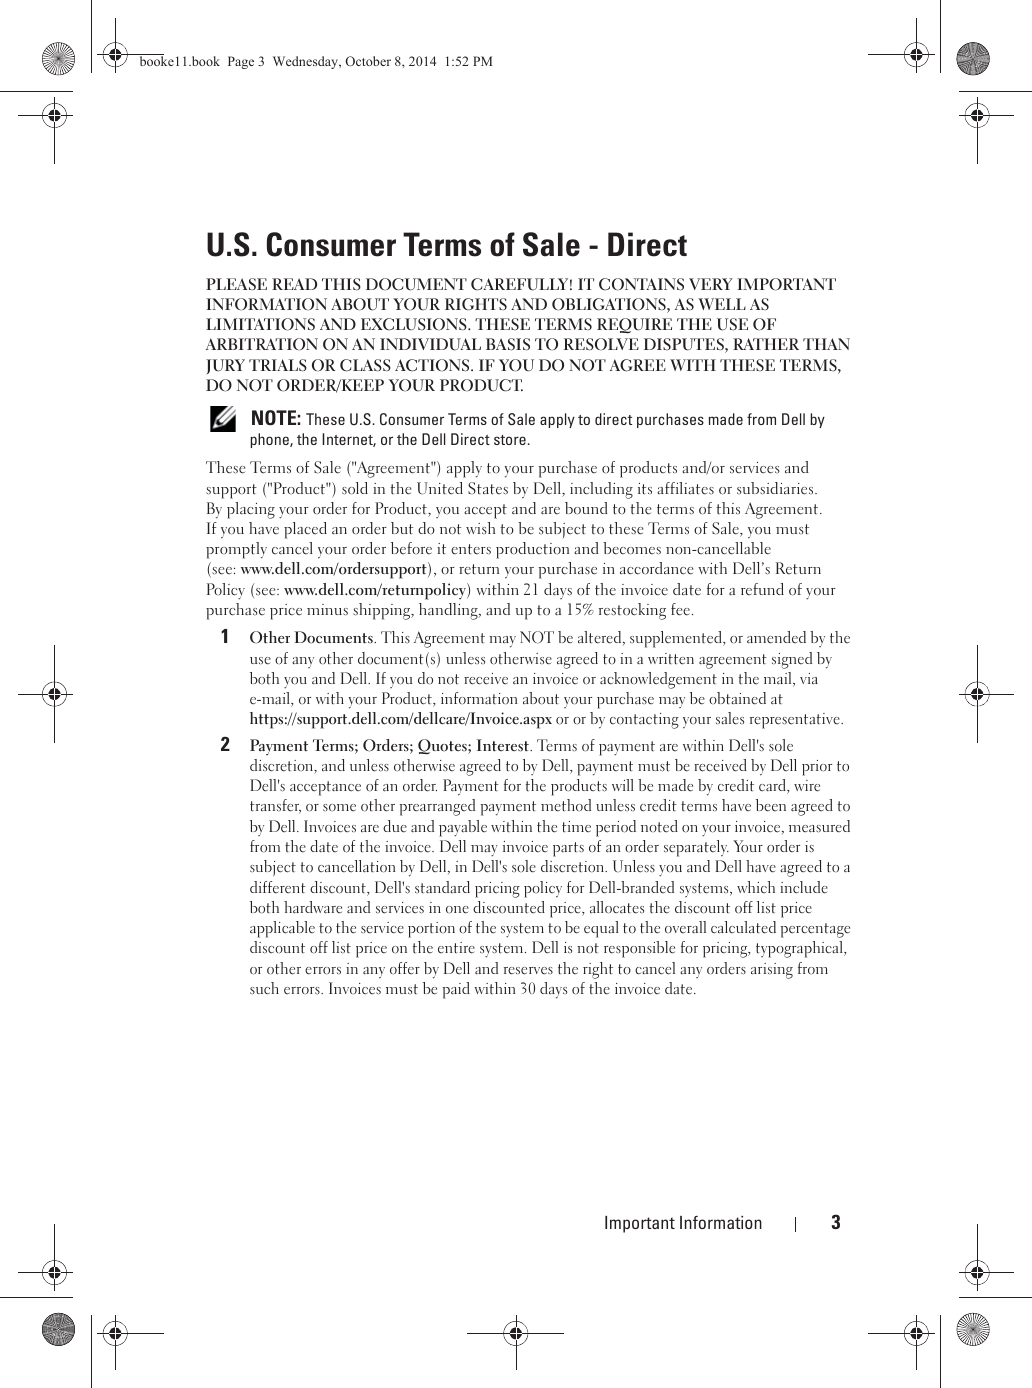 Important Information 3U.S. Consumer Terms of Sale - DirectPLEASE READ THIS DOCUMENT CAREFULLY! IT CONTAINS VERY IMPORTANT INFORMATION ABOUT YOUR RIGHTS AND OBLIGATIONS, AS WELL AS LIMITATIONS AND EXCLUSIONS. THESE TERMS REQUIRE THE USE OF ARBITRATION ON AN INDIVIDUAL BASIS TO RESOLVE DISPUTES, RATHER THAN JURY TRIALS OR CLASS ACTIONS. IF YOU DO NOT AGREE WITH THESE TERMS, DO NOT ORDER/KEEP YOUR PRODUCT. NOTE: These U.S. Consumer Terms of Sale apply to direct purchases made from Dell by phone, the Internet, or the Dell Direct store.These Terms of Sale (&quot;Agreement&quot;) apply to your purchase of products and/or services and support (&quot;Product&quot;) sold in the United States by Dell, including its affiliates or subsidiaries. By placing your order for Product, you accept and are bound to the terms of this Agreement. If you have placed an order but do not wish to be subject to these Terms of Sale, you must promptly cancel your order before it enters production and becomes non-cancellable (see: www.dell.com/ordersupport), or return your purchase in accordance with Dell’s Return Policy (see: www.dell.com/returnpolicy) within 21 days of the invoice date for a refund of your purchase price minus shipping, handling, and up to a 15% restocking fee.1Other Documents. This Agreement may NOT be altered, supplemented, or amended by the use of any other document(s) unless otherwise agreed to in a written agreement signed by both you and Dell. If you do not receive an invoice or acknowledgement in the mail, via e-mail, or with your Product, information about your purchase may be obtained at https://support.dell.com/dellcare/Invoice.aspx or or by contacting your sales representative.2Payment Terms; Orders; Quotes; Interest. Terms of payment are within Dell&apos;s sole discretion, and unless otherwise agreed to by Dell, payment must be received by Dell prior to Dell&apos;s acceptance of an order. Payment for the products will be made by credit card, wire transfer, or some other prearranged payment method unless credit terms have been agreed to by Dell. Invoices are due and payable within the time period noted on your invoice, measured from the date of the invoice. Dell may invoice parts of an order separately. Your order is subject to cancellation by Dell, in Dell&apos;s sole discretion. Unless you and Dell have agreed to a different discount, Dell&apos;s standard pricing policy for Dell-branded systems, which include both hardware and services in one discounted price, allocates the discount off list price applicable to the service portion of the system to be equal to the overall calculated percentage discount off list price on the entire system. Dell is not responsible for pricing, typographical, or other errors in any offer by Dell and reserves the right to cancel any orders arising from such errors. Invoices must be paid within 30 days of the invoice date. booke11.book  Page 3  Wednesday, October 8, 2014  1:52 PM